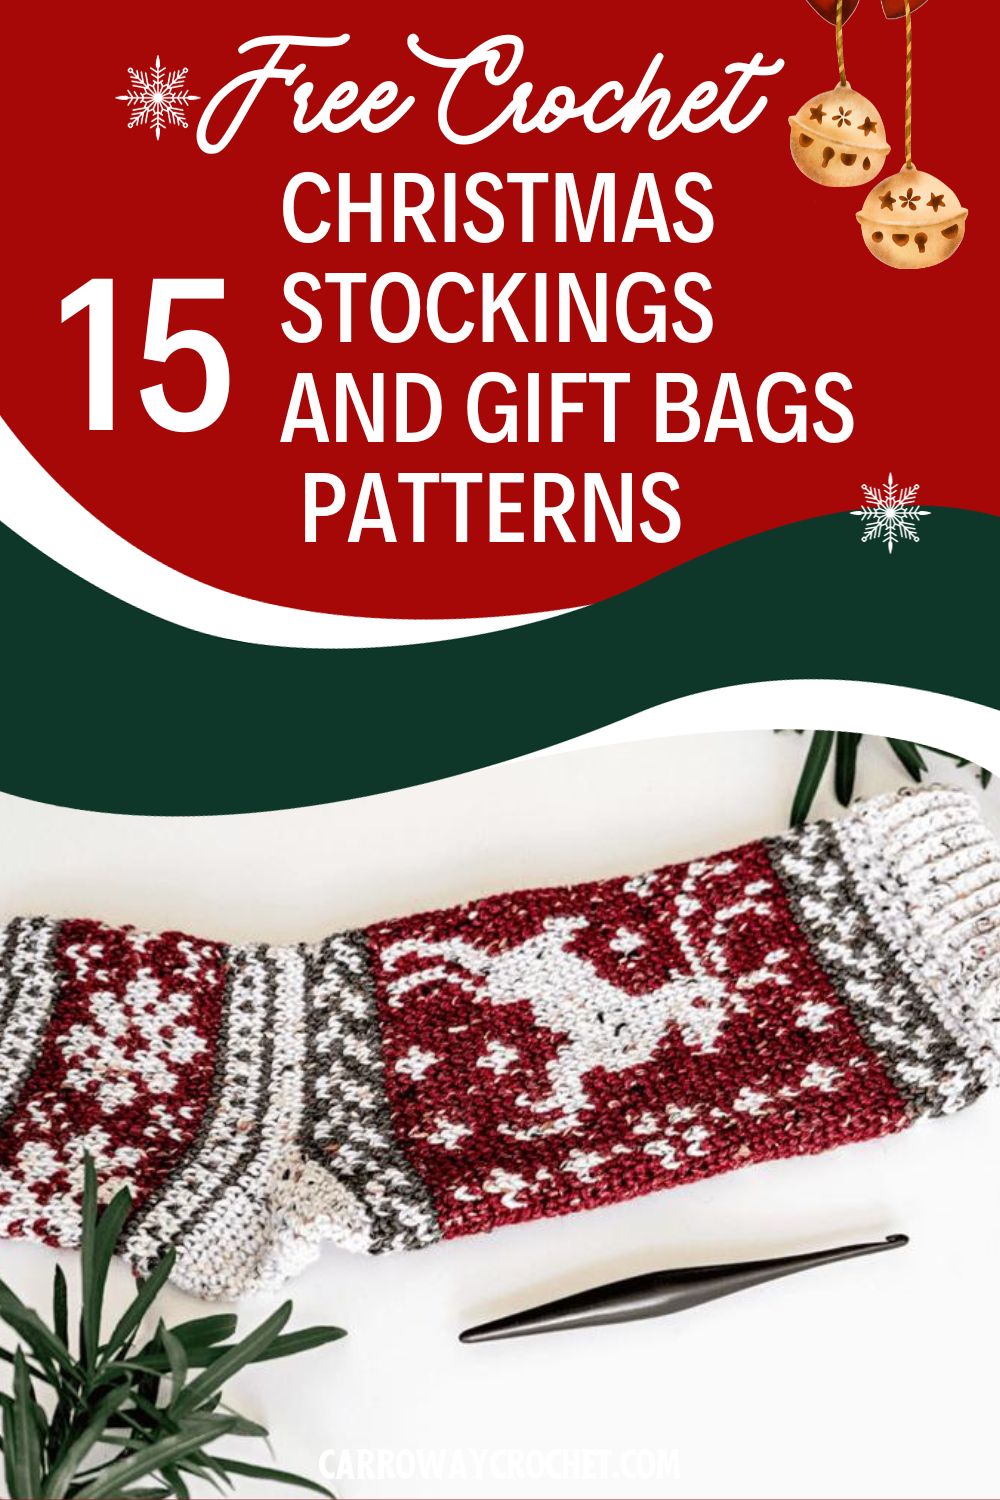 15 Free Crochet Christmas Stockings and Gift Bags Patterns. - Carroway  Crochet